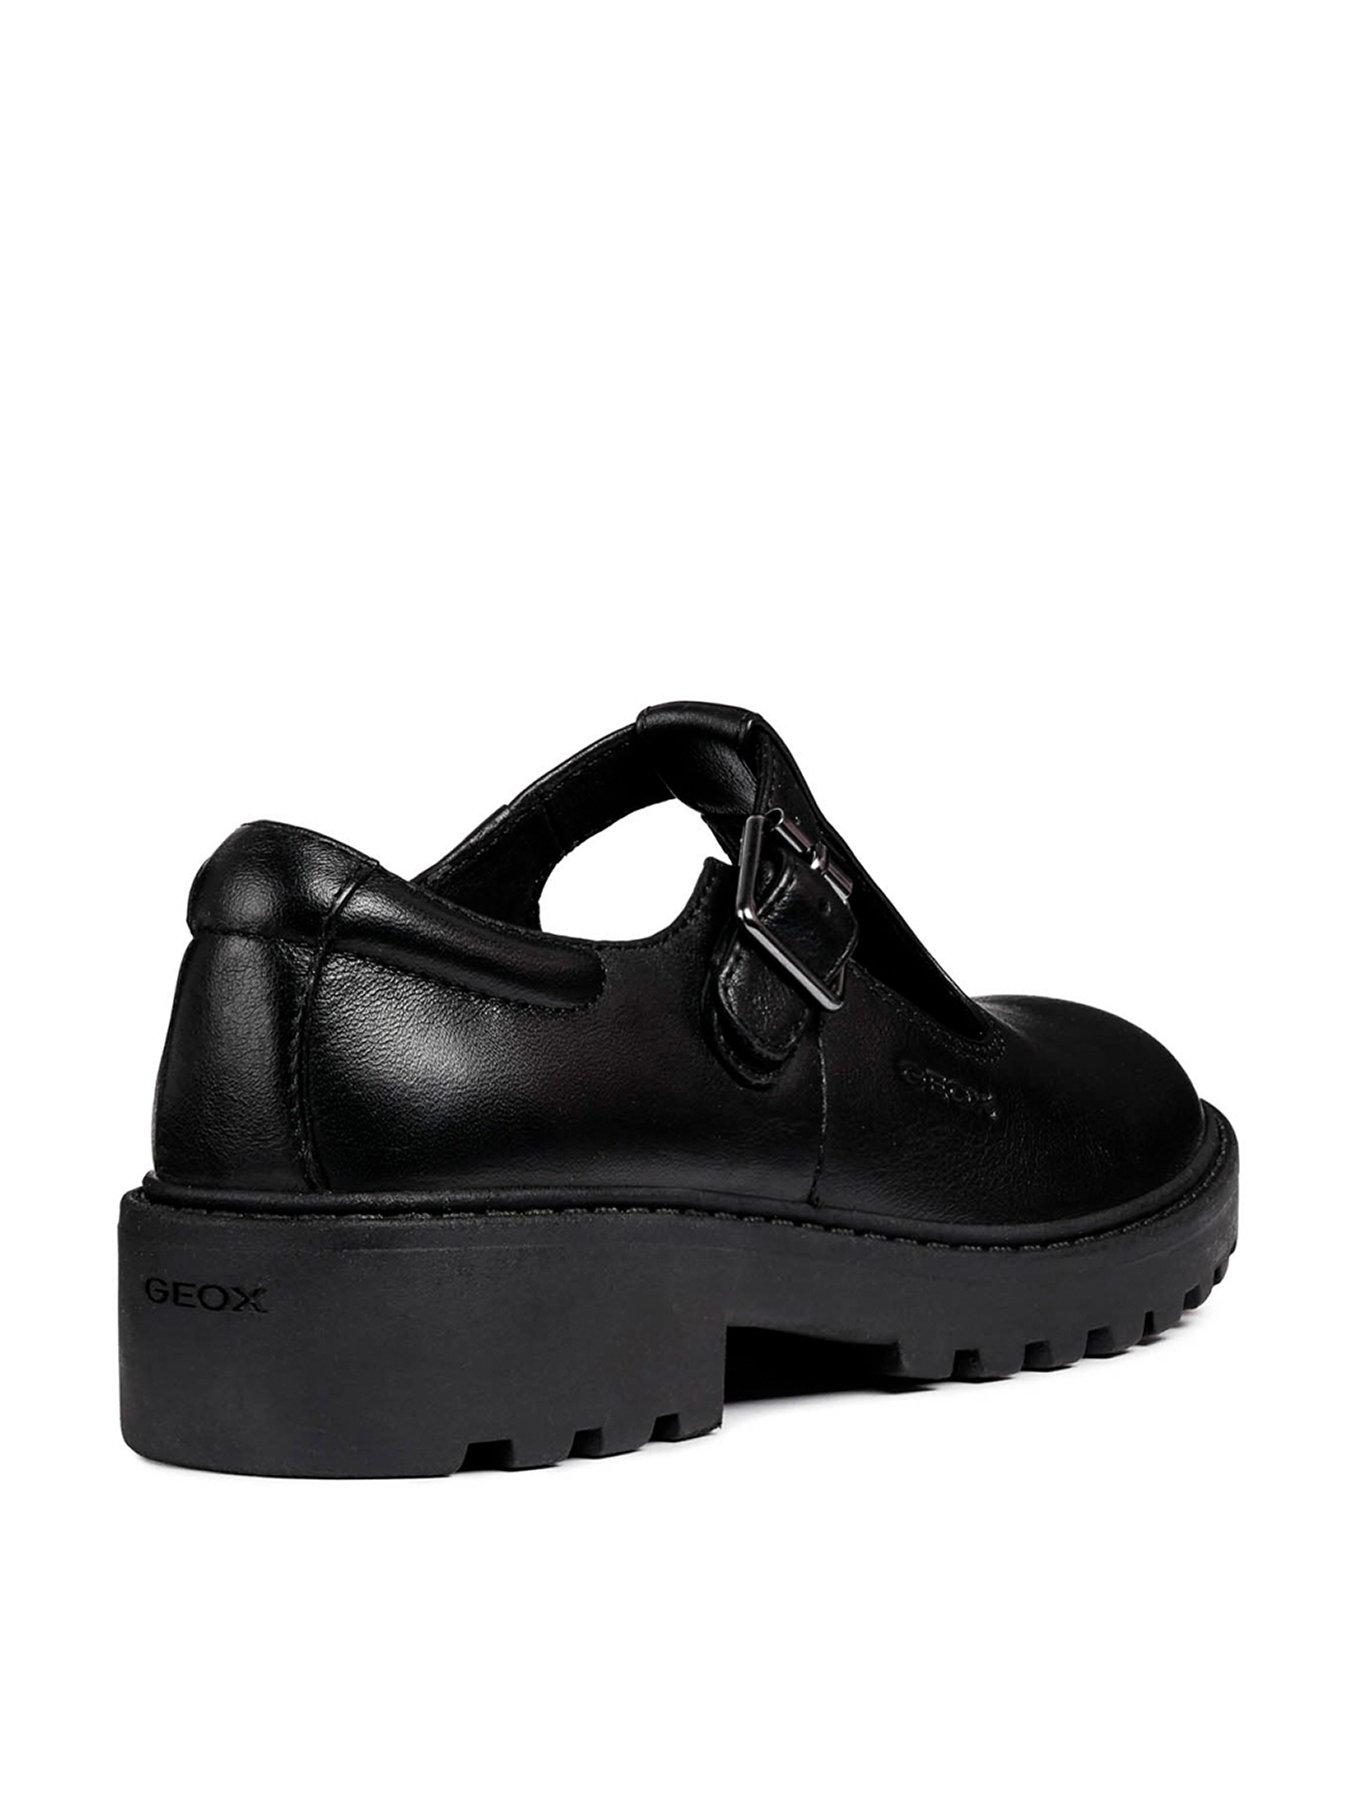 cuenco déficit roto Geox Casey Leather T-bar School Shoes - Black | very.co.uk